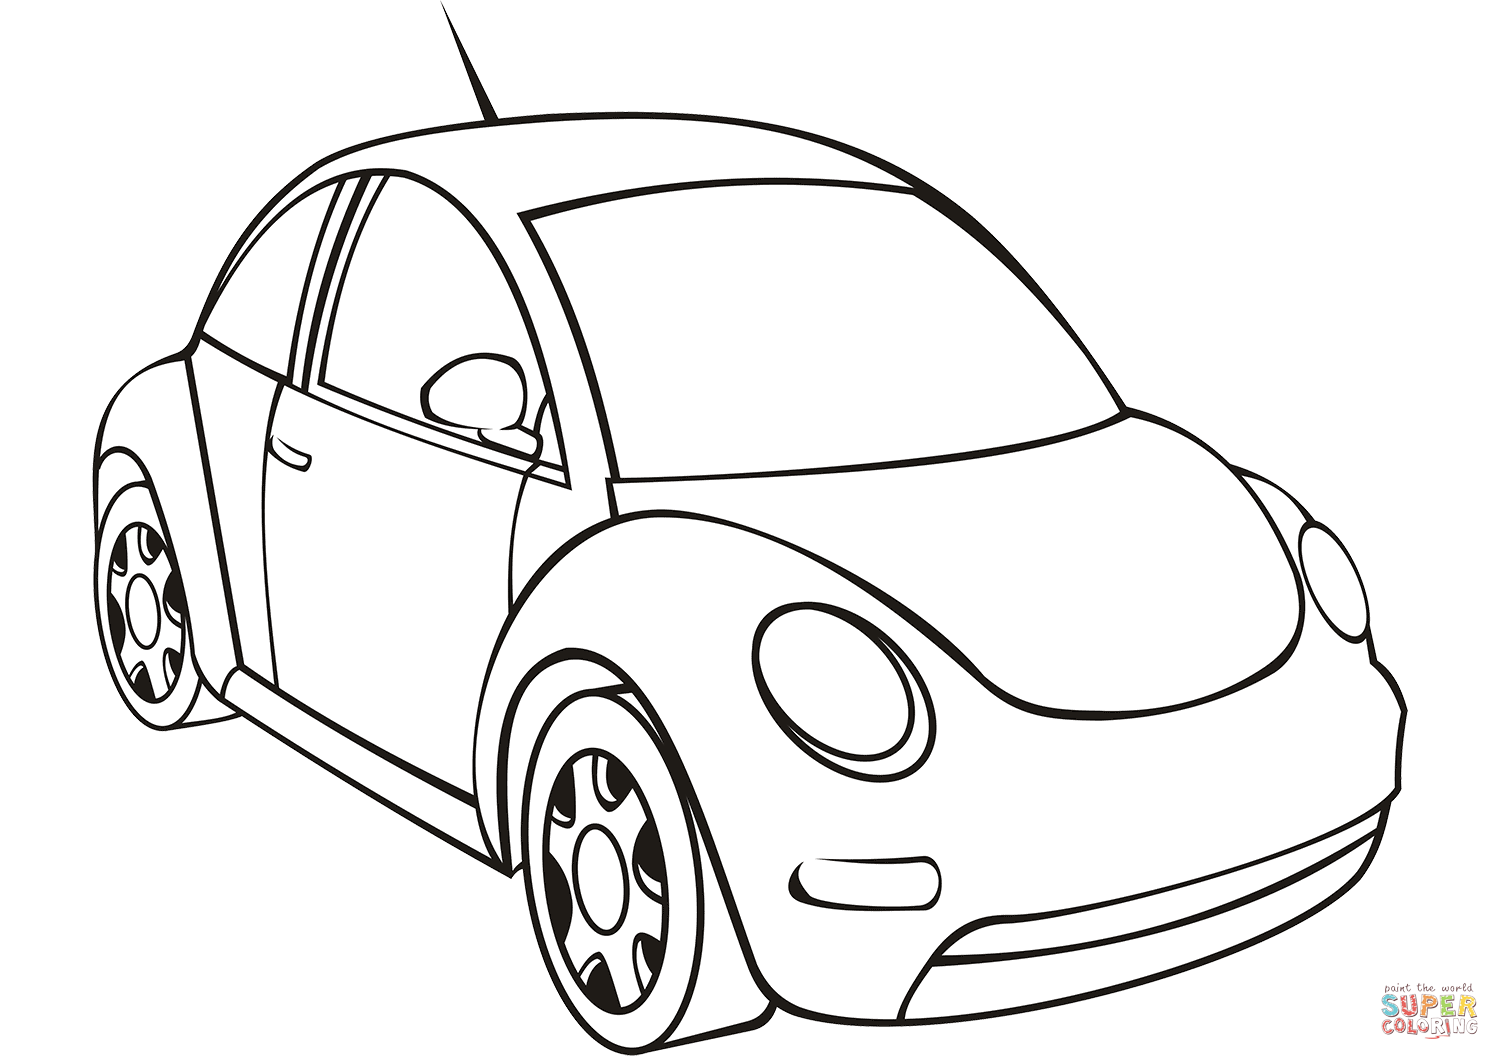 VW Beetle coloring page | Free Printable Coloring Pages